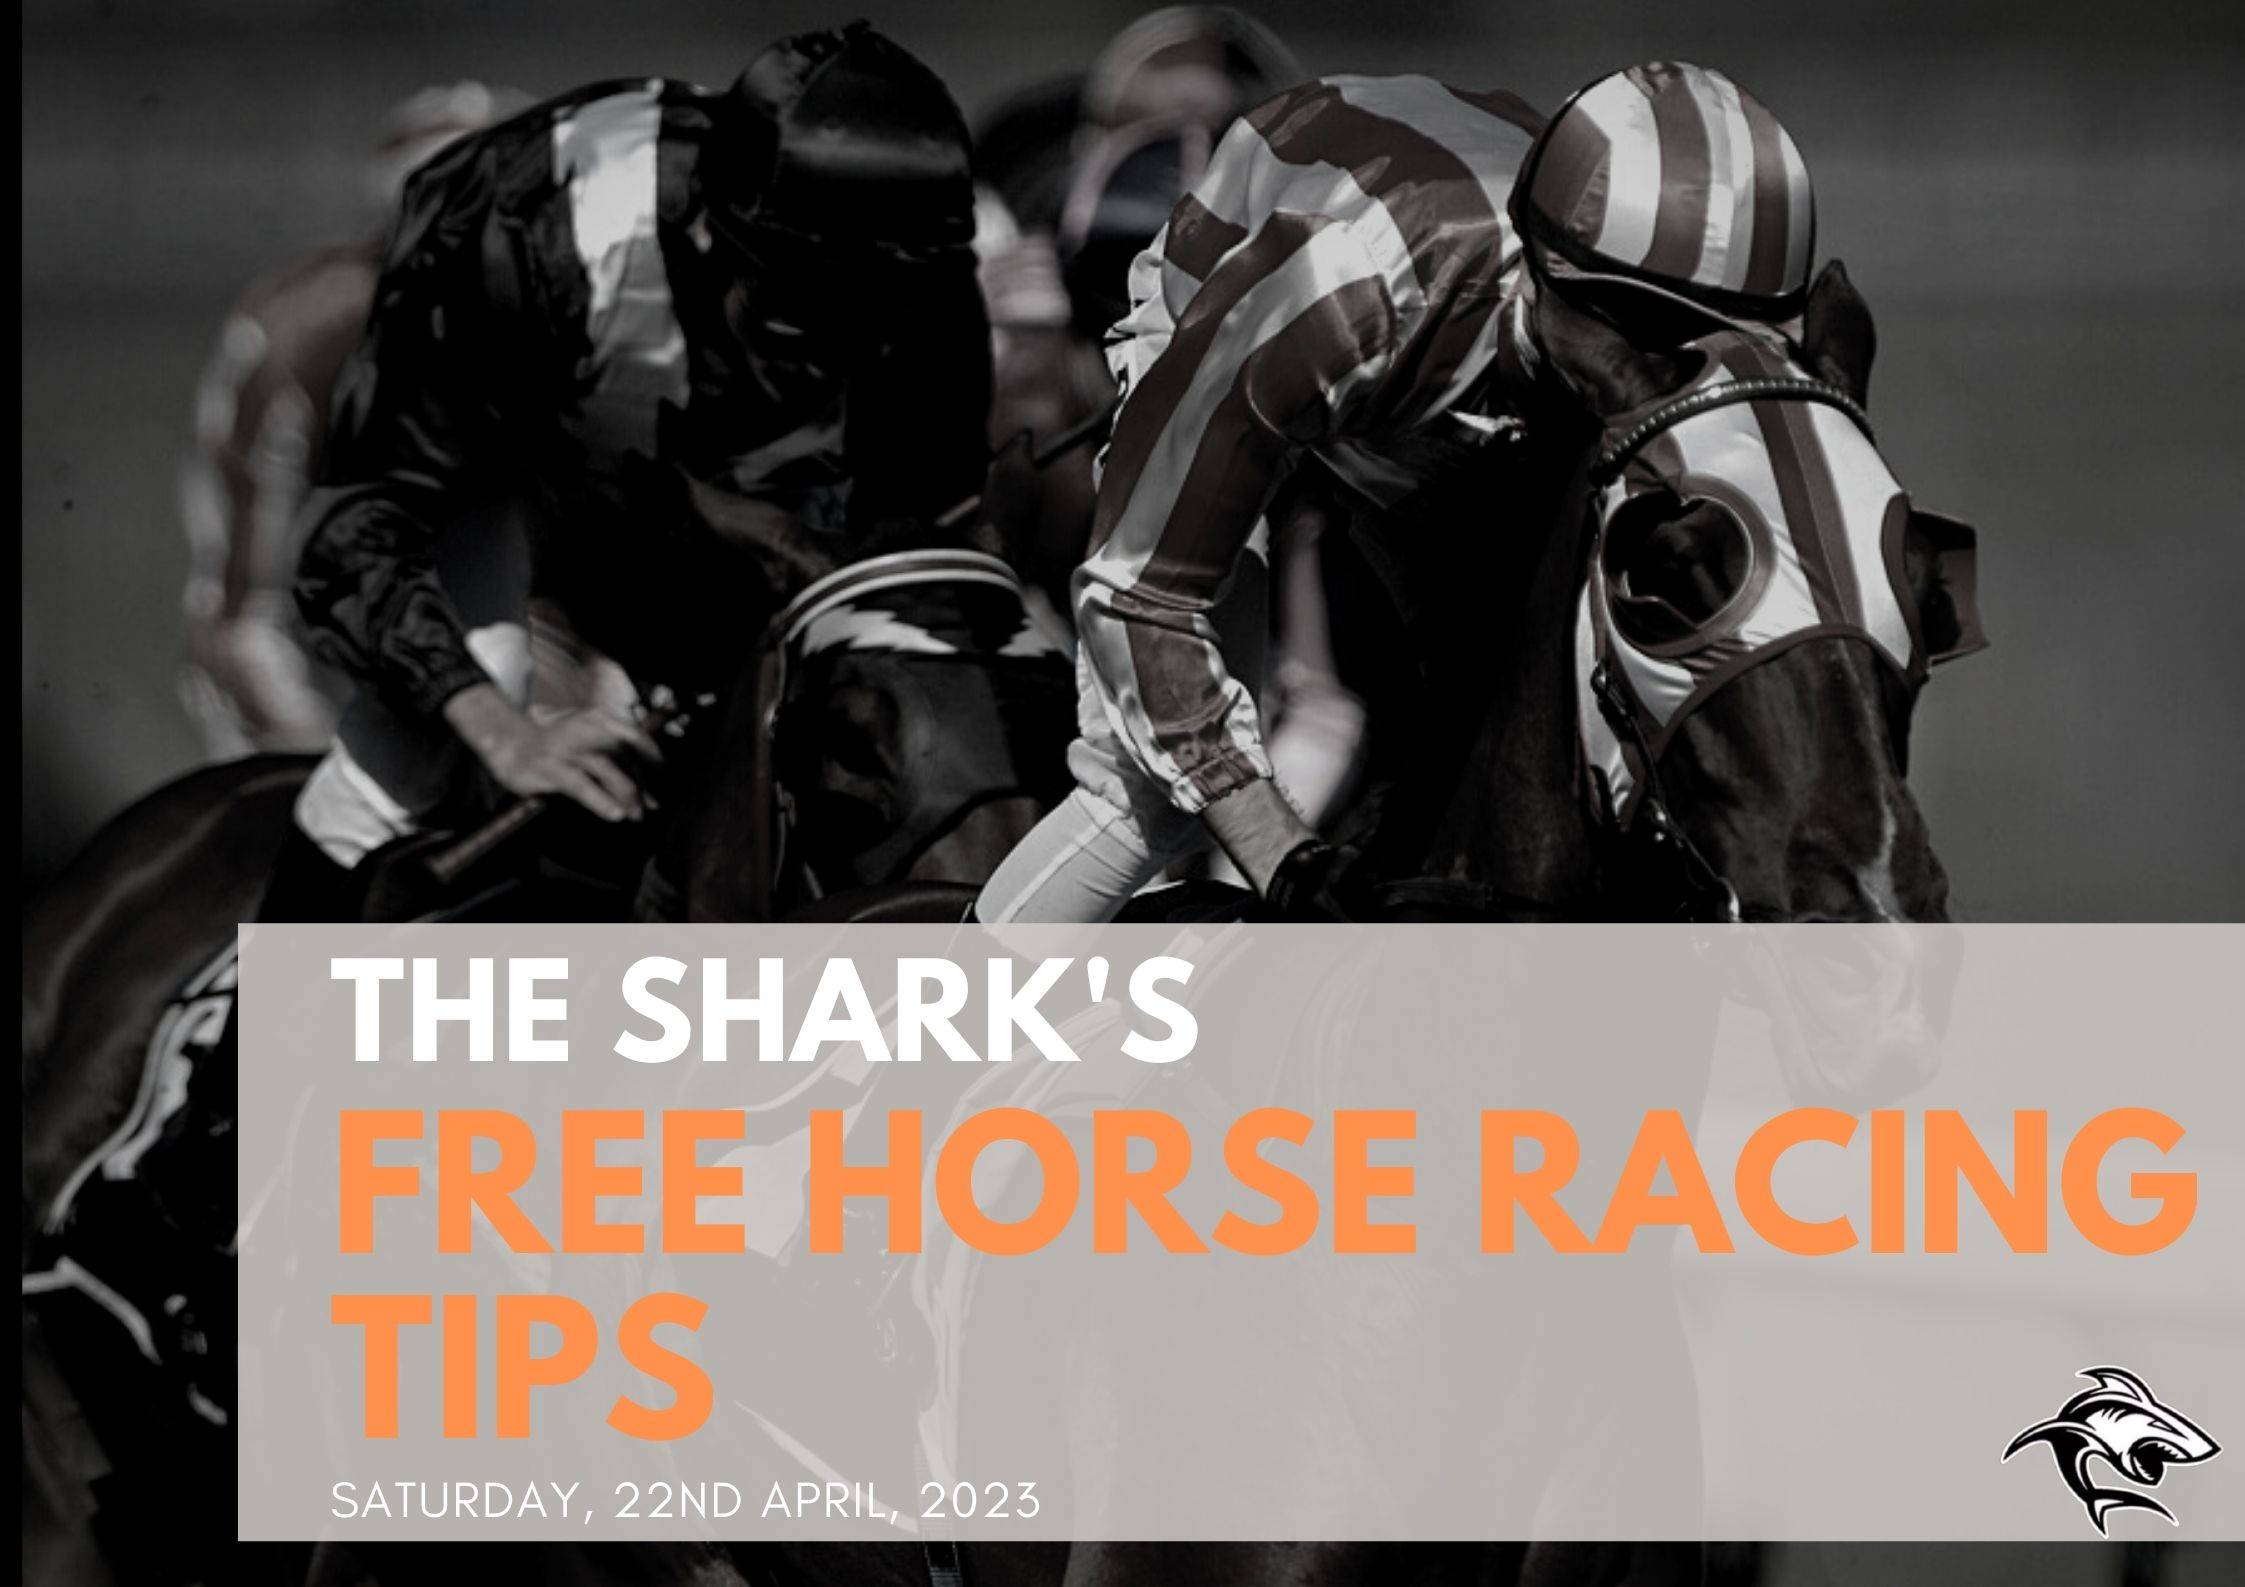 Free Horse Racing Tips - 22nd Apr